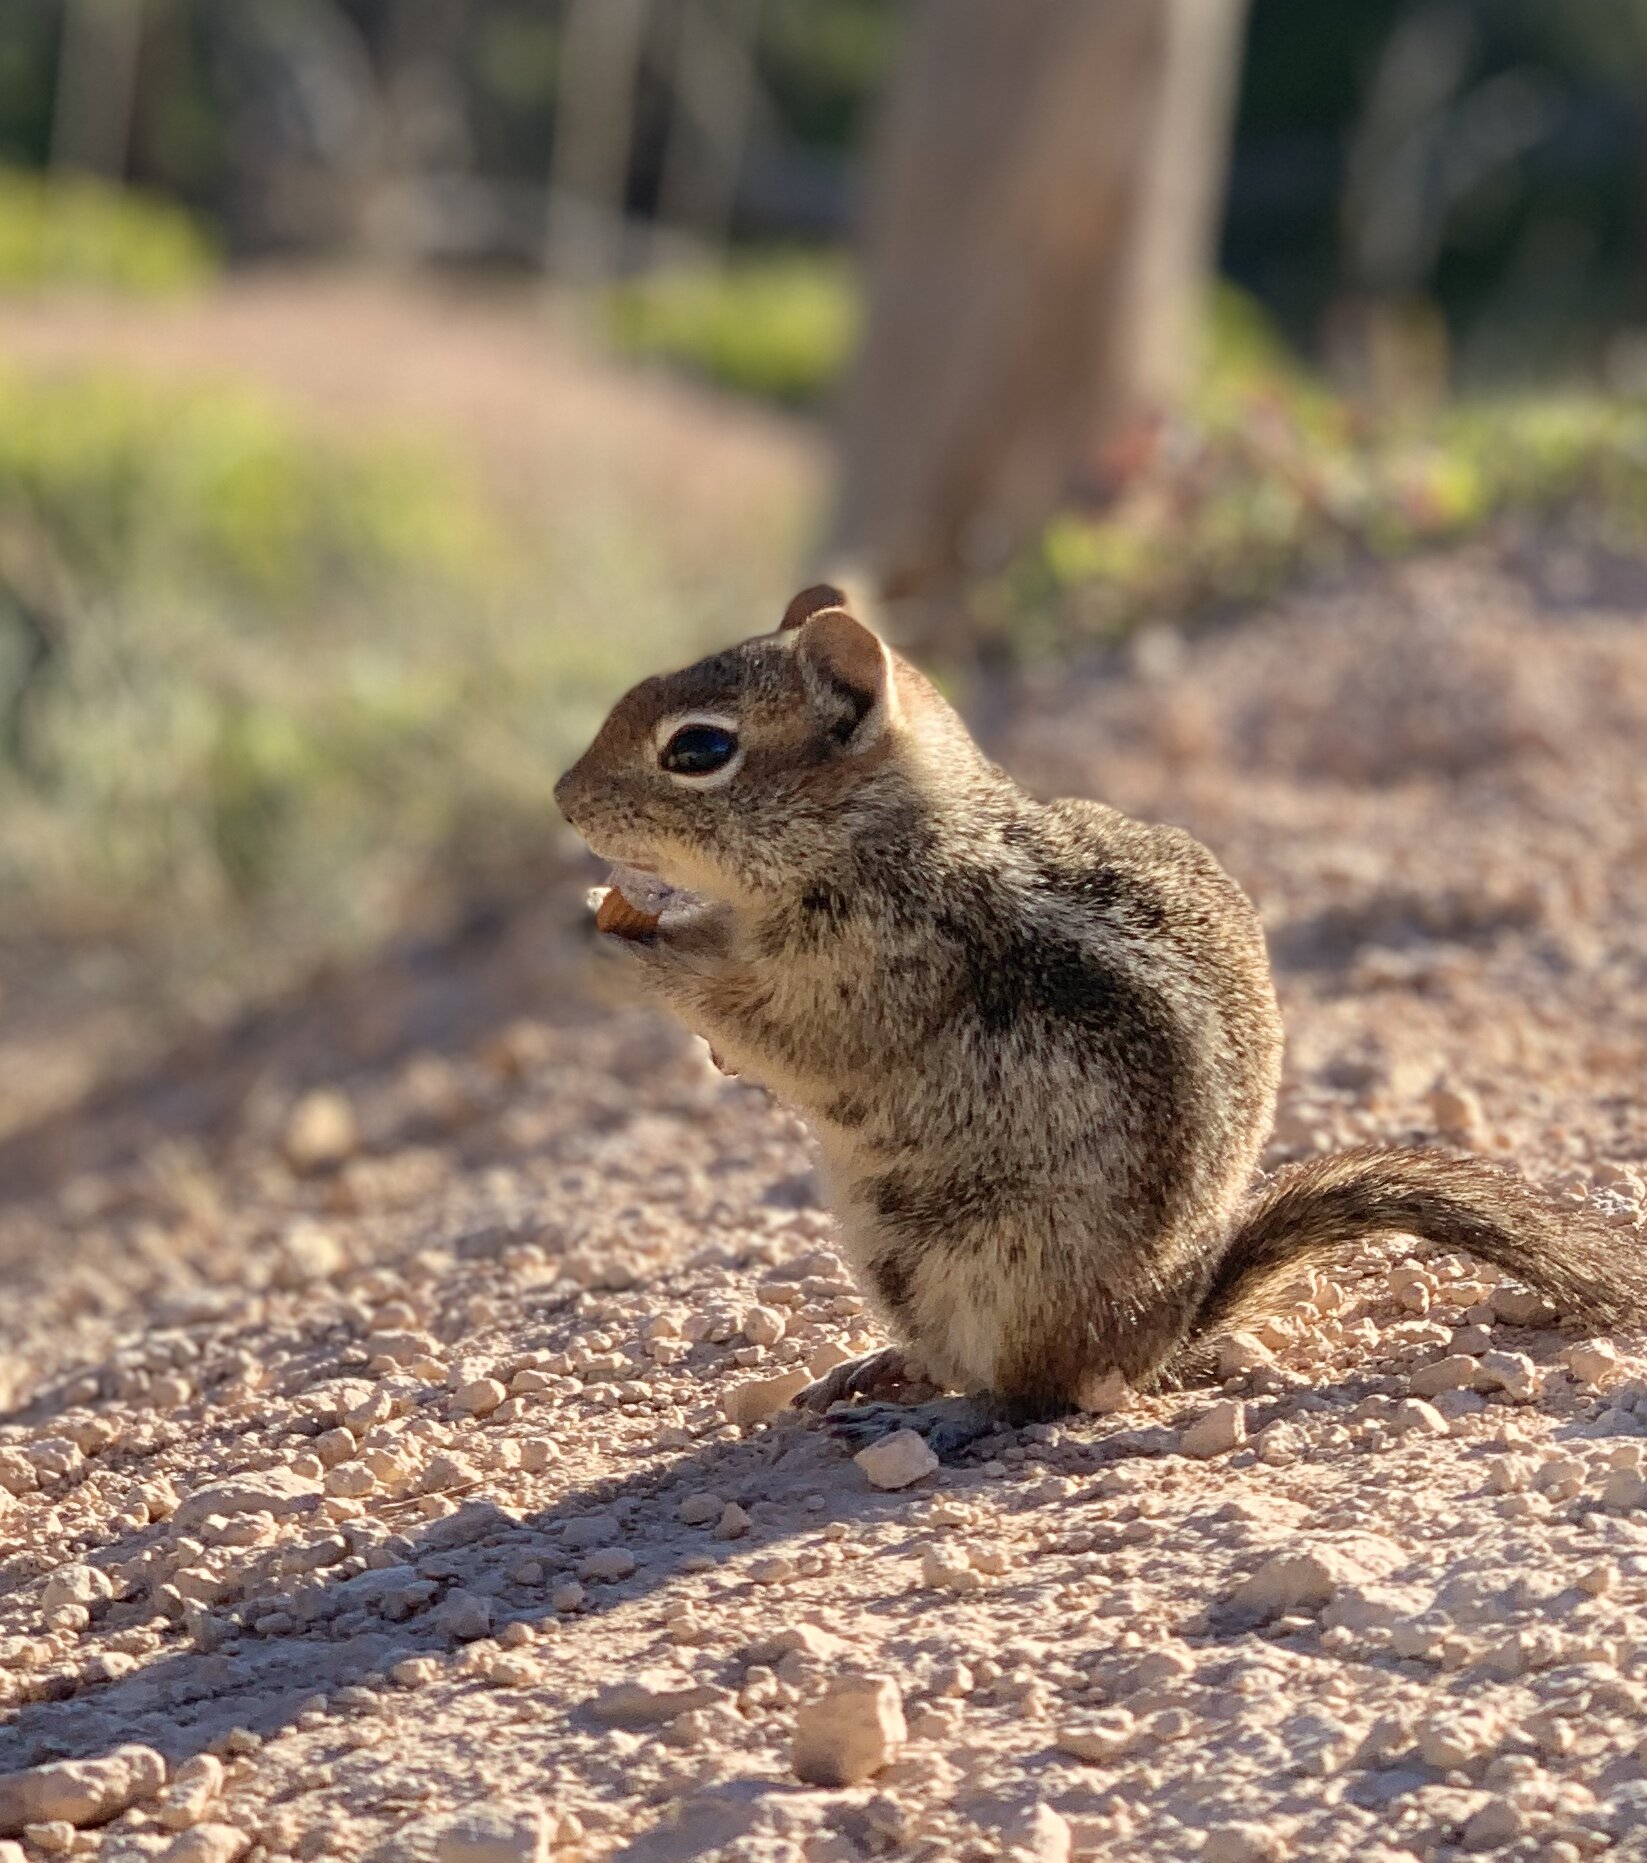  Any hike that involves spotting wildlife is a success in my book! I enjoyed sharing my almonds with this Uinta chipmunk. He gets his name for being native to the Uinta Mountains, named after the Ute Indian tribe and reservation, about 350 miles nort